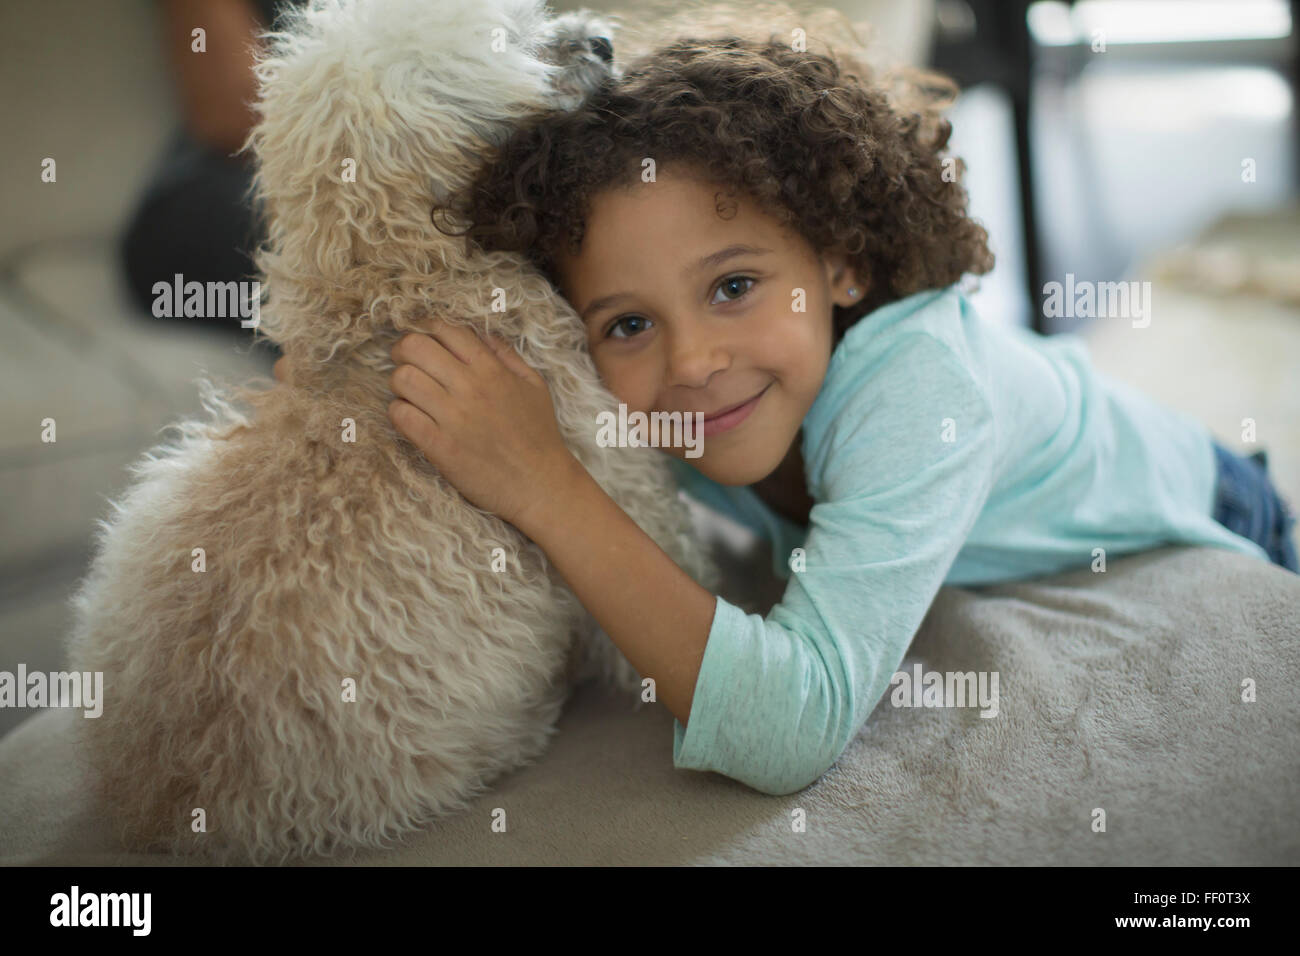 Mixed Race girl hugging dog Banque D'Images